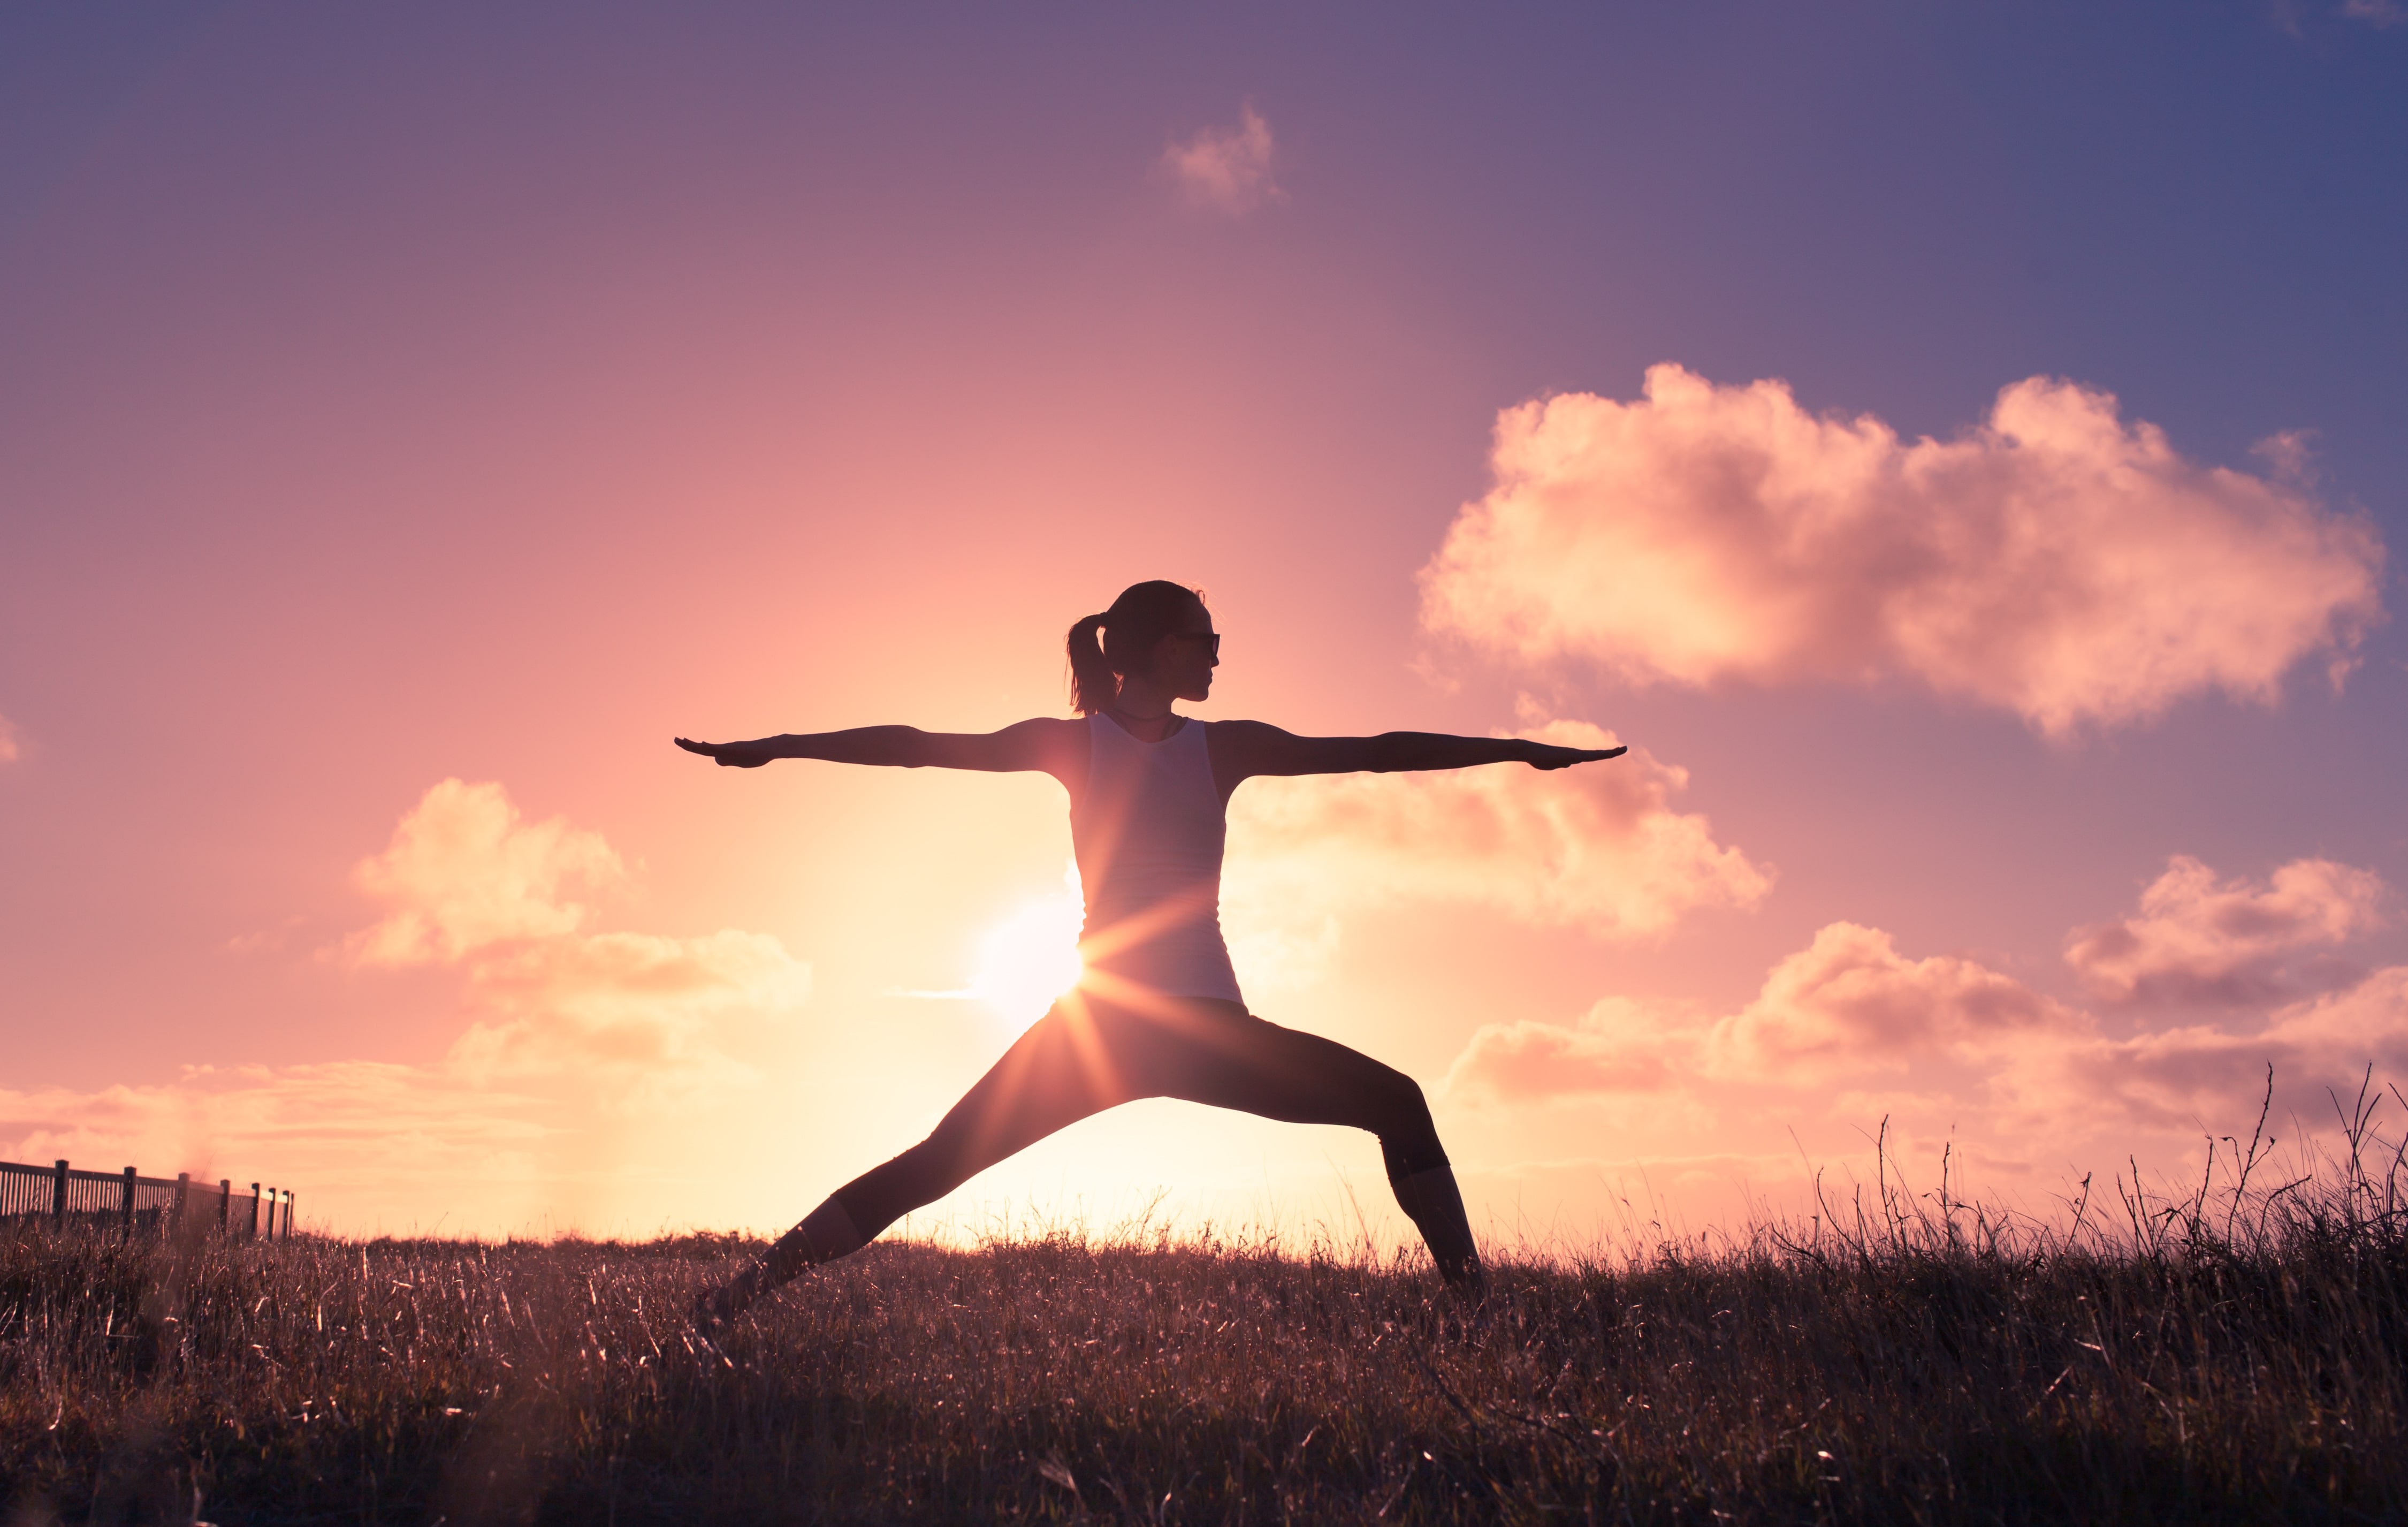 Woman in a grassy field practicing yoga as the sun glows behind her.